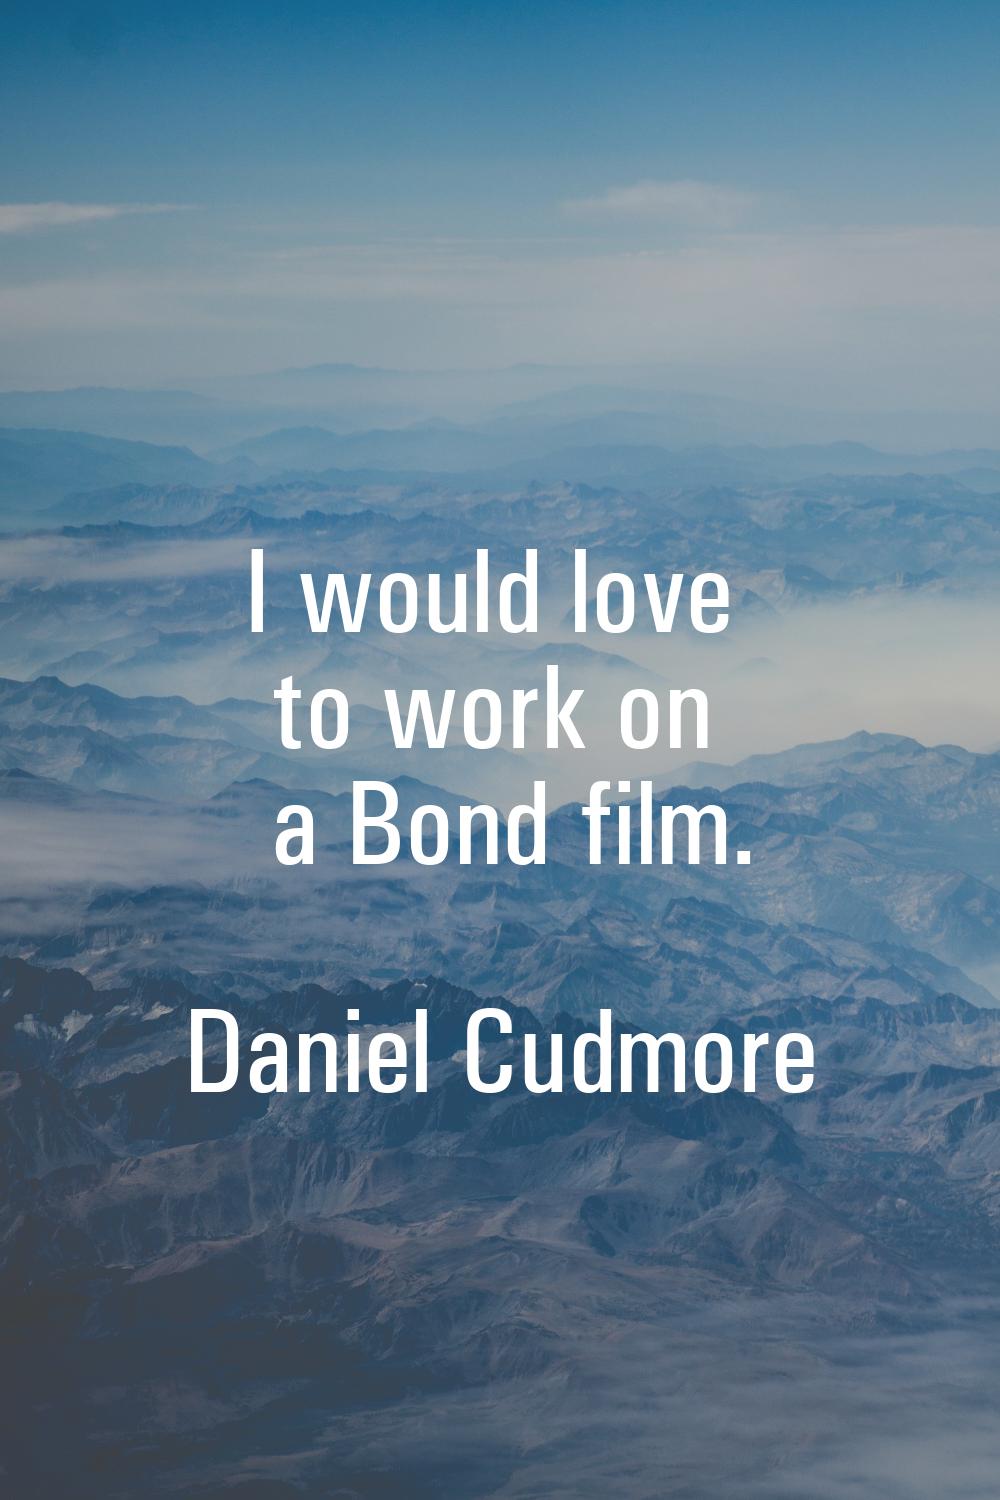 I would love to work on a Bond film.